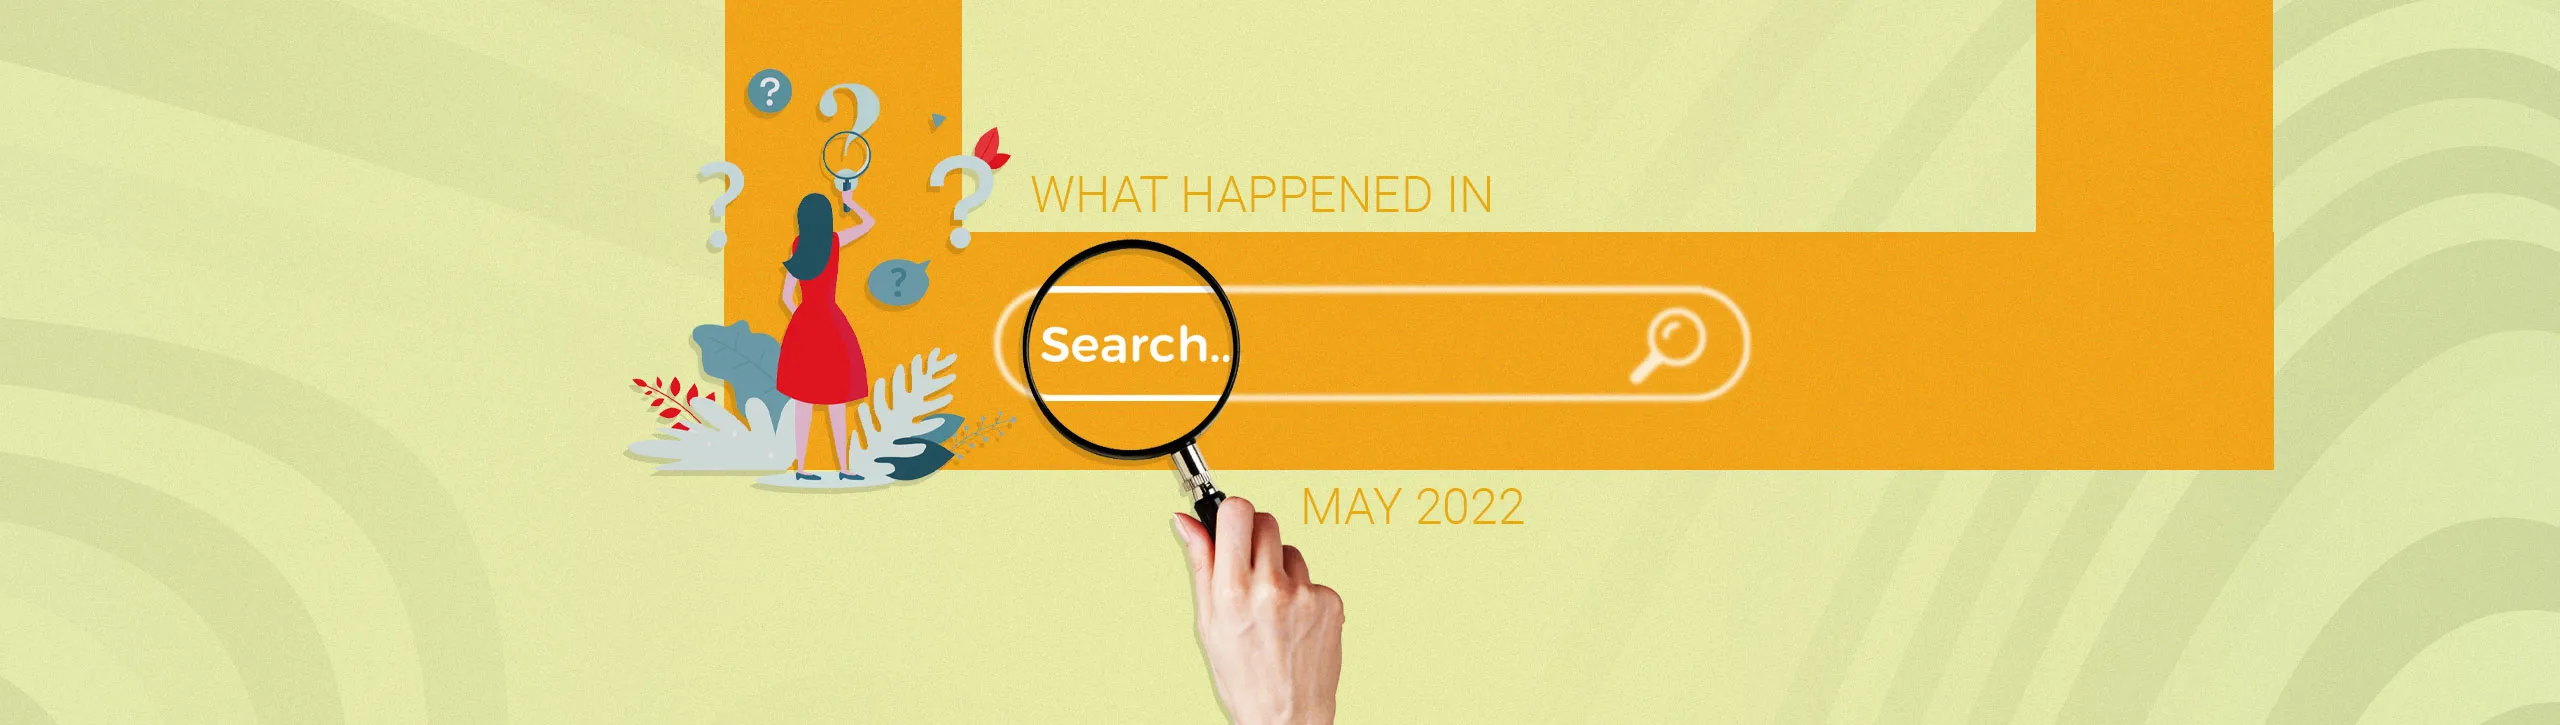 What happened in search May 2022